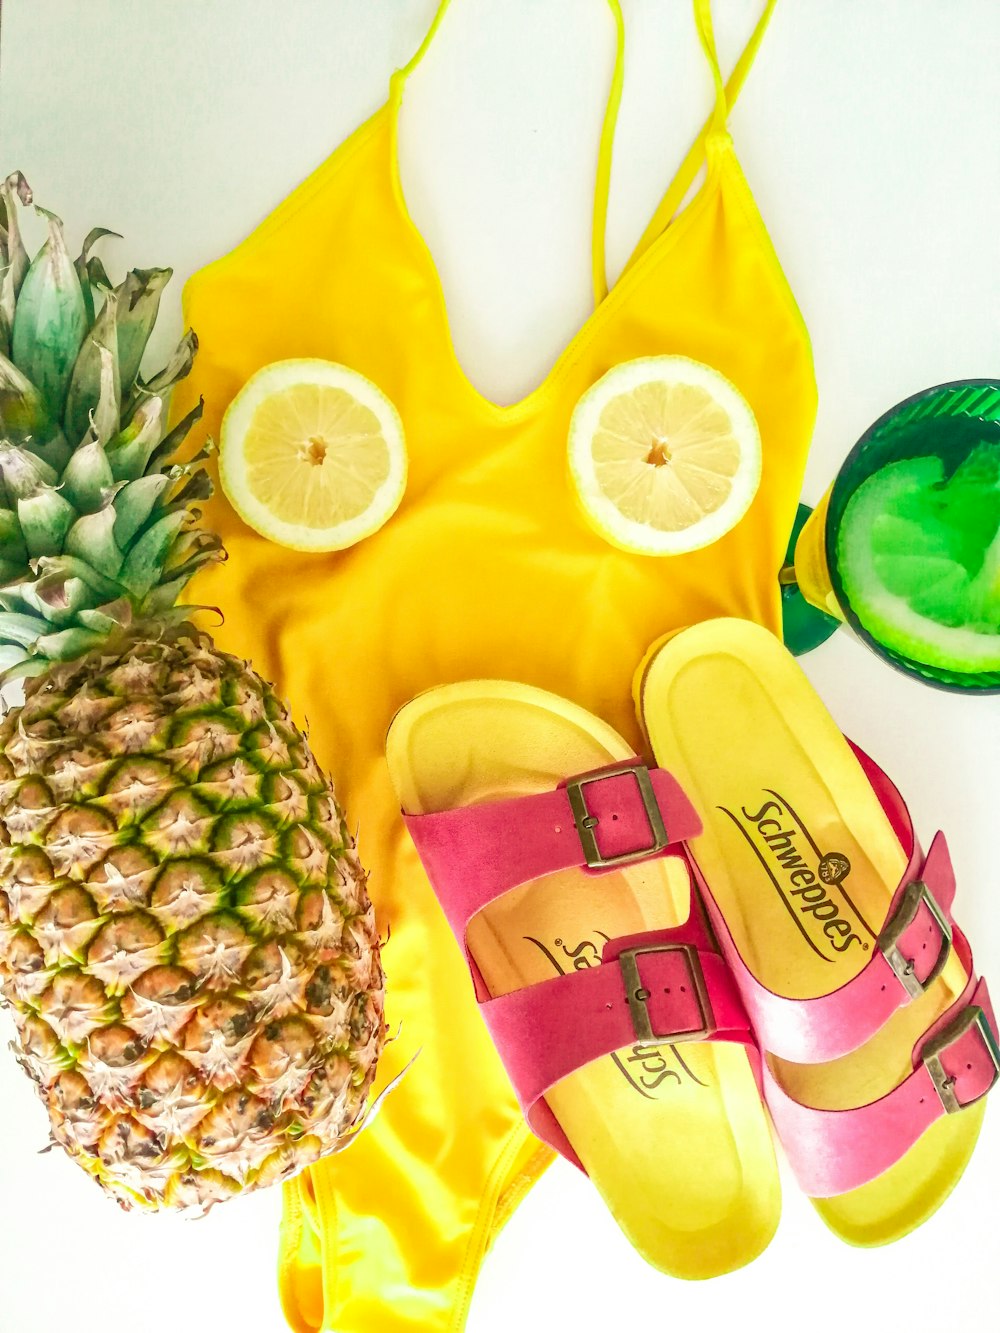 a pineapple, a pair of sandals and a pineapple on a yellow towel